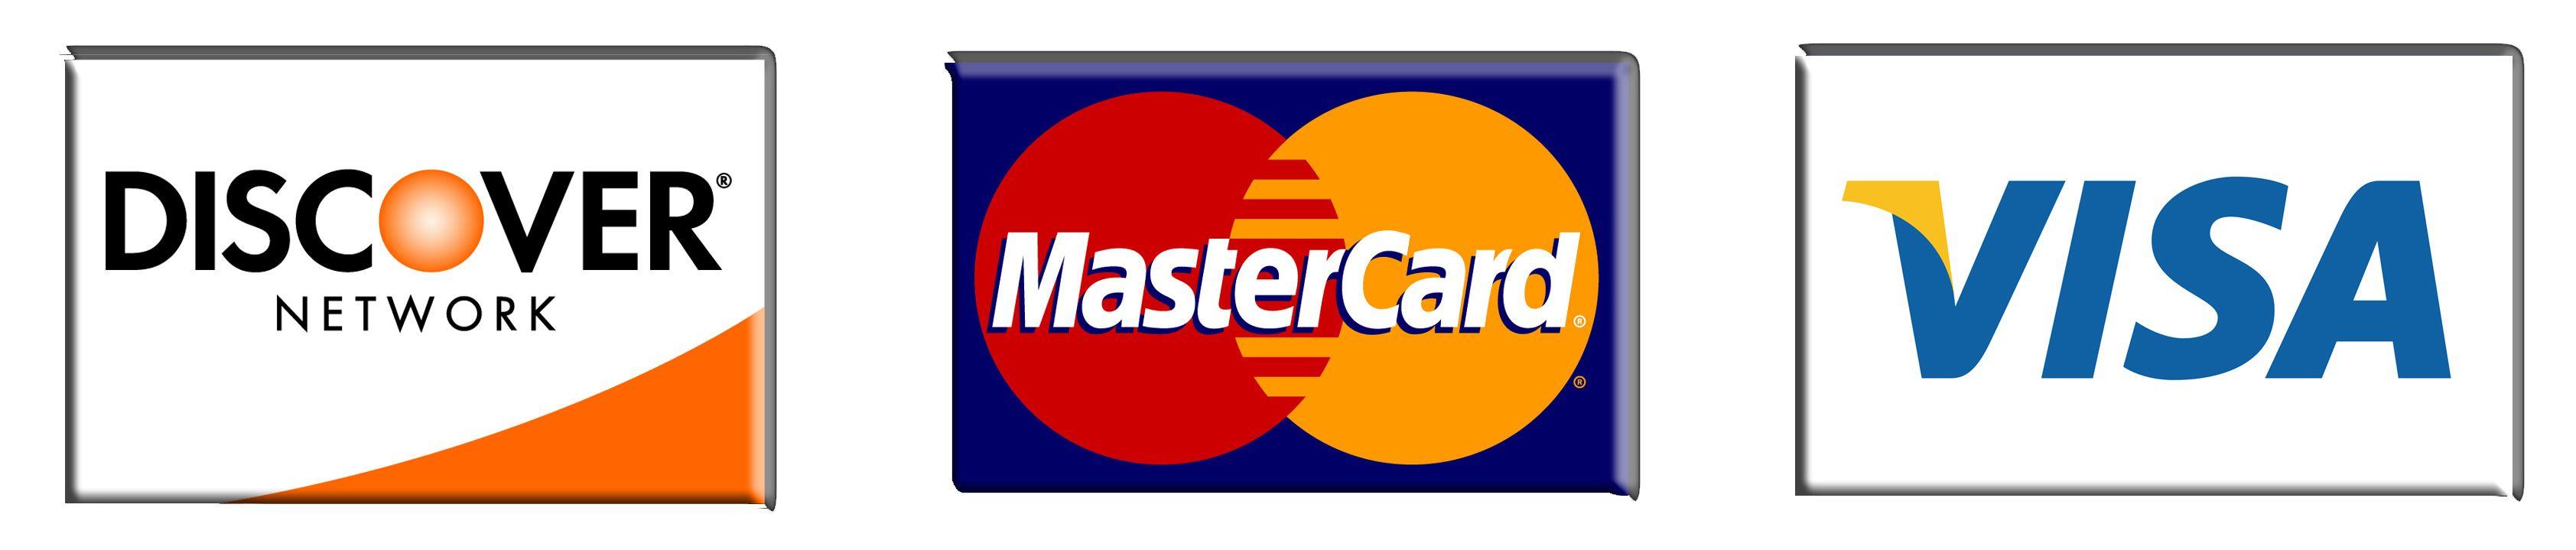 is discover visa or mastercard